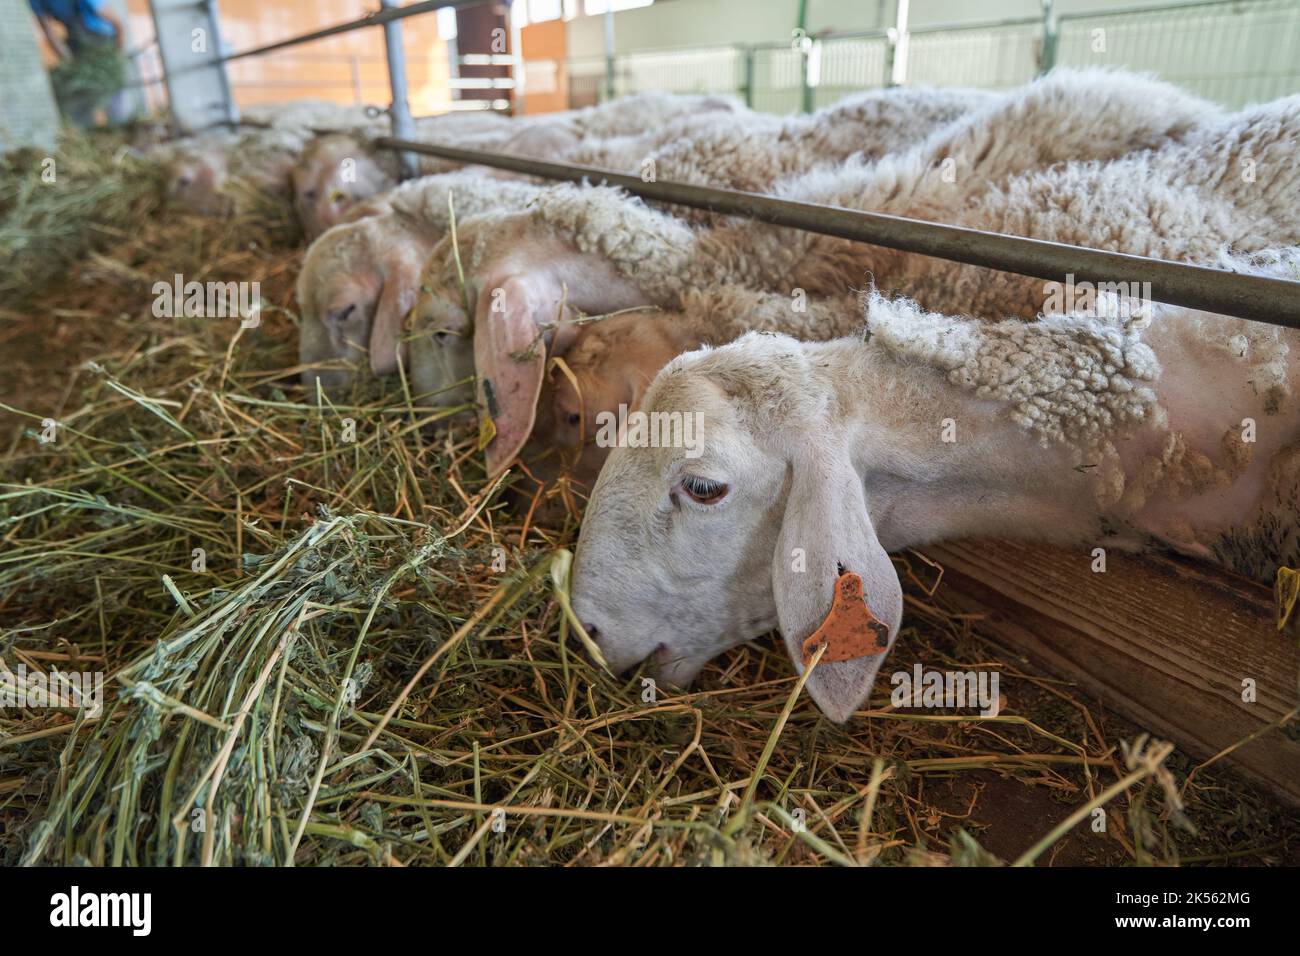 Herd of sheep eating feed on the farm. Stock Photo